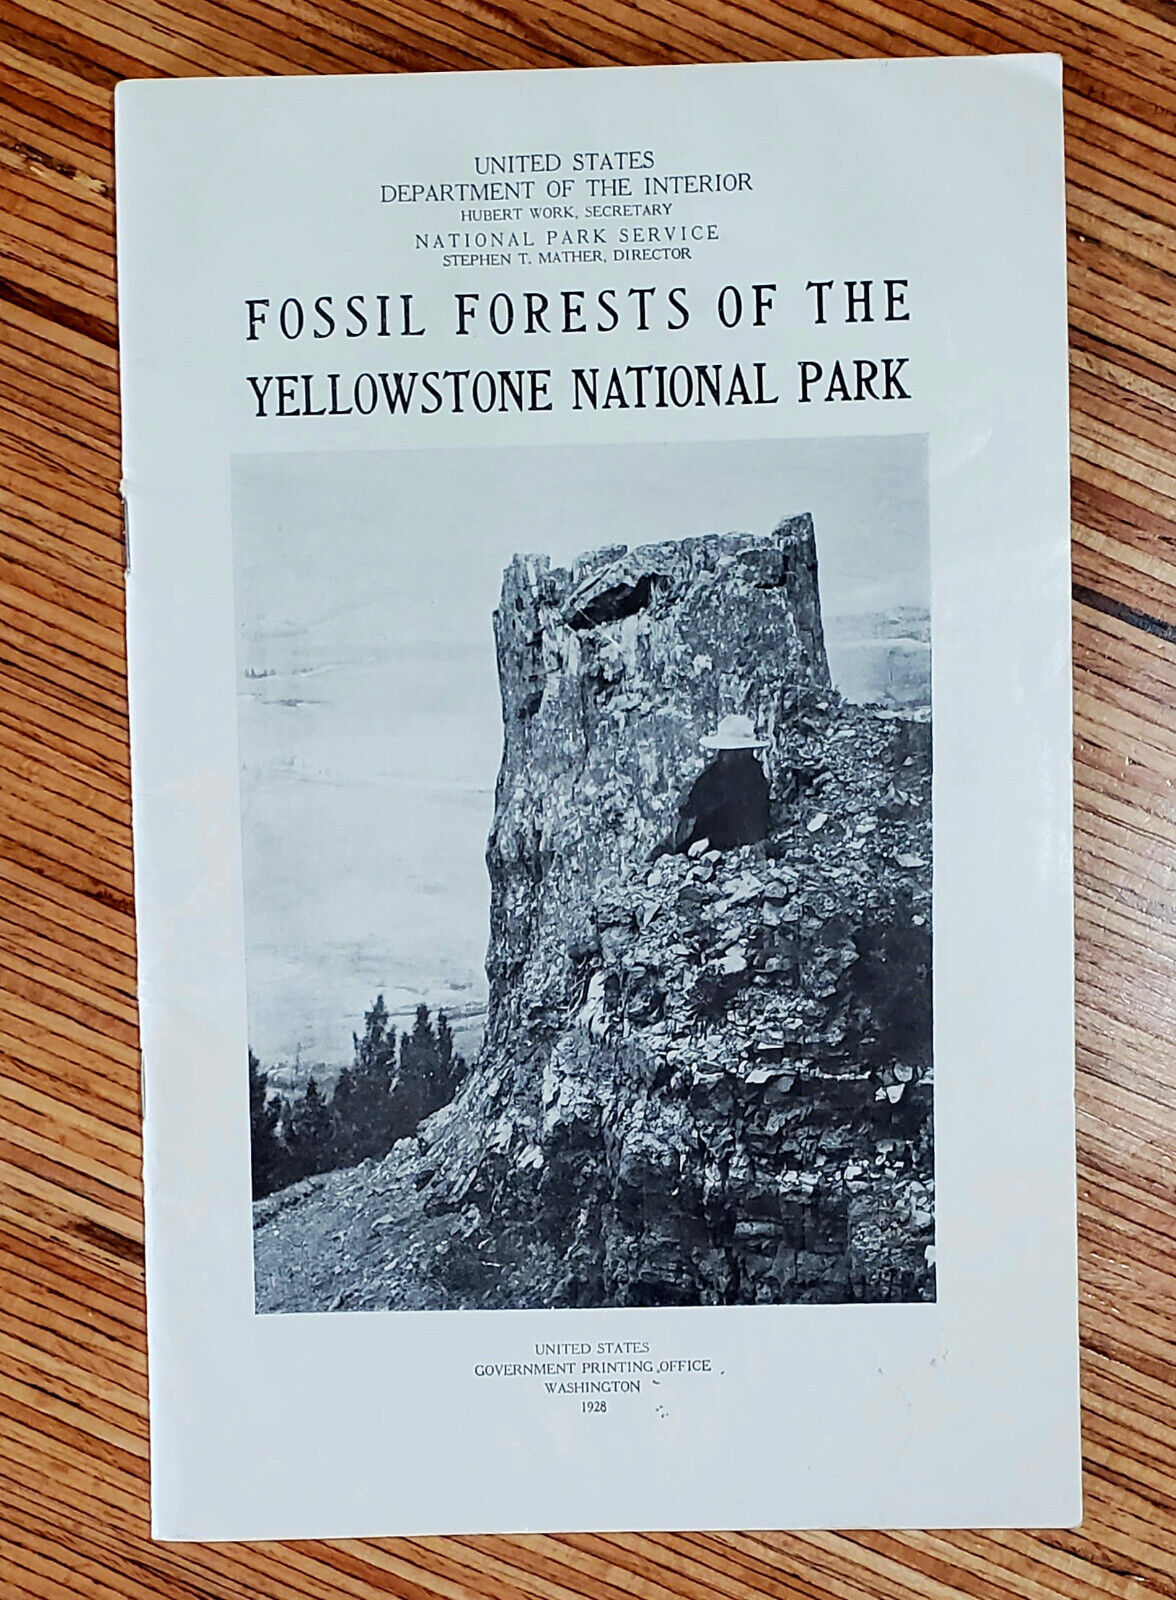 Fossil Forests of the Yellowstone National Park booklet 1928